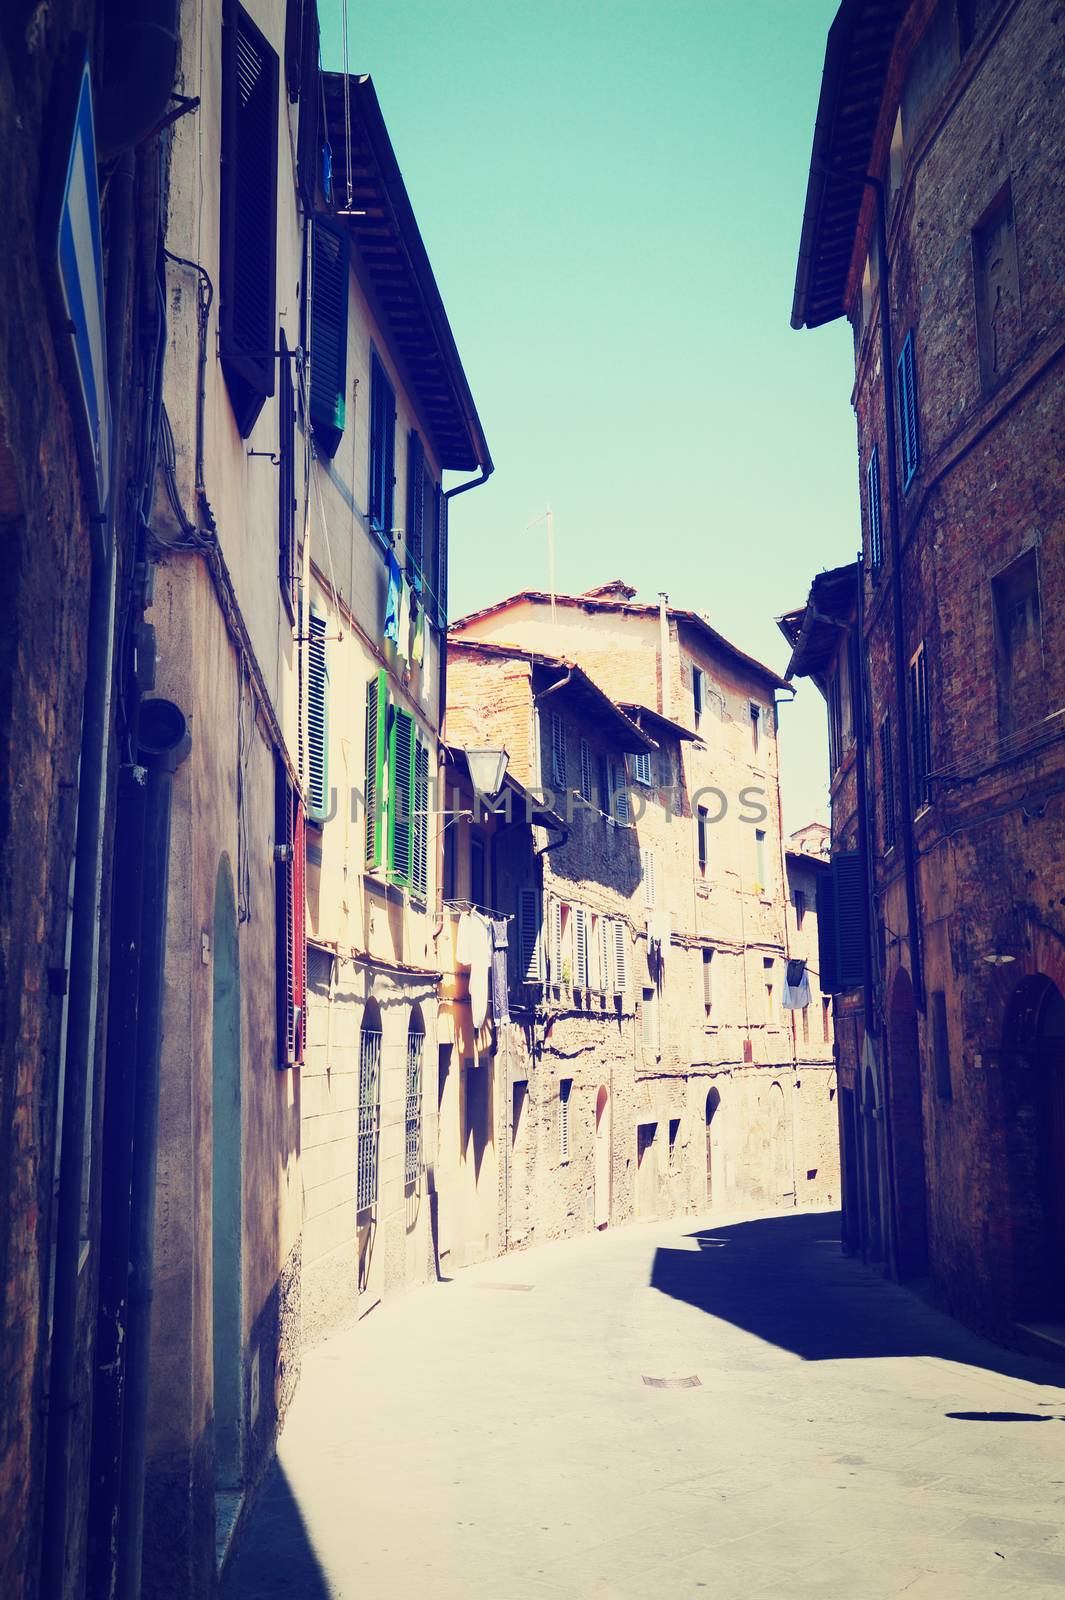 Narrow Alley with Old Buildings in Italian City of Siena, Instagram Effect